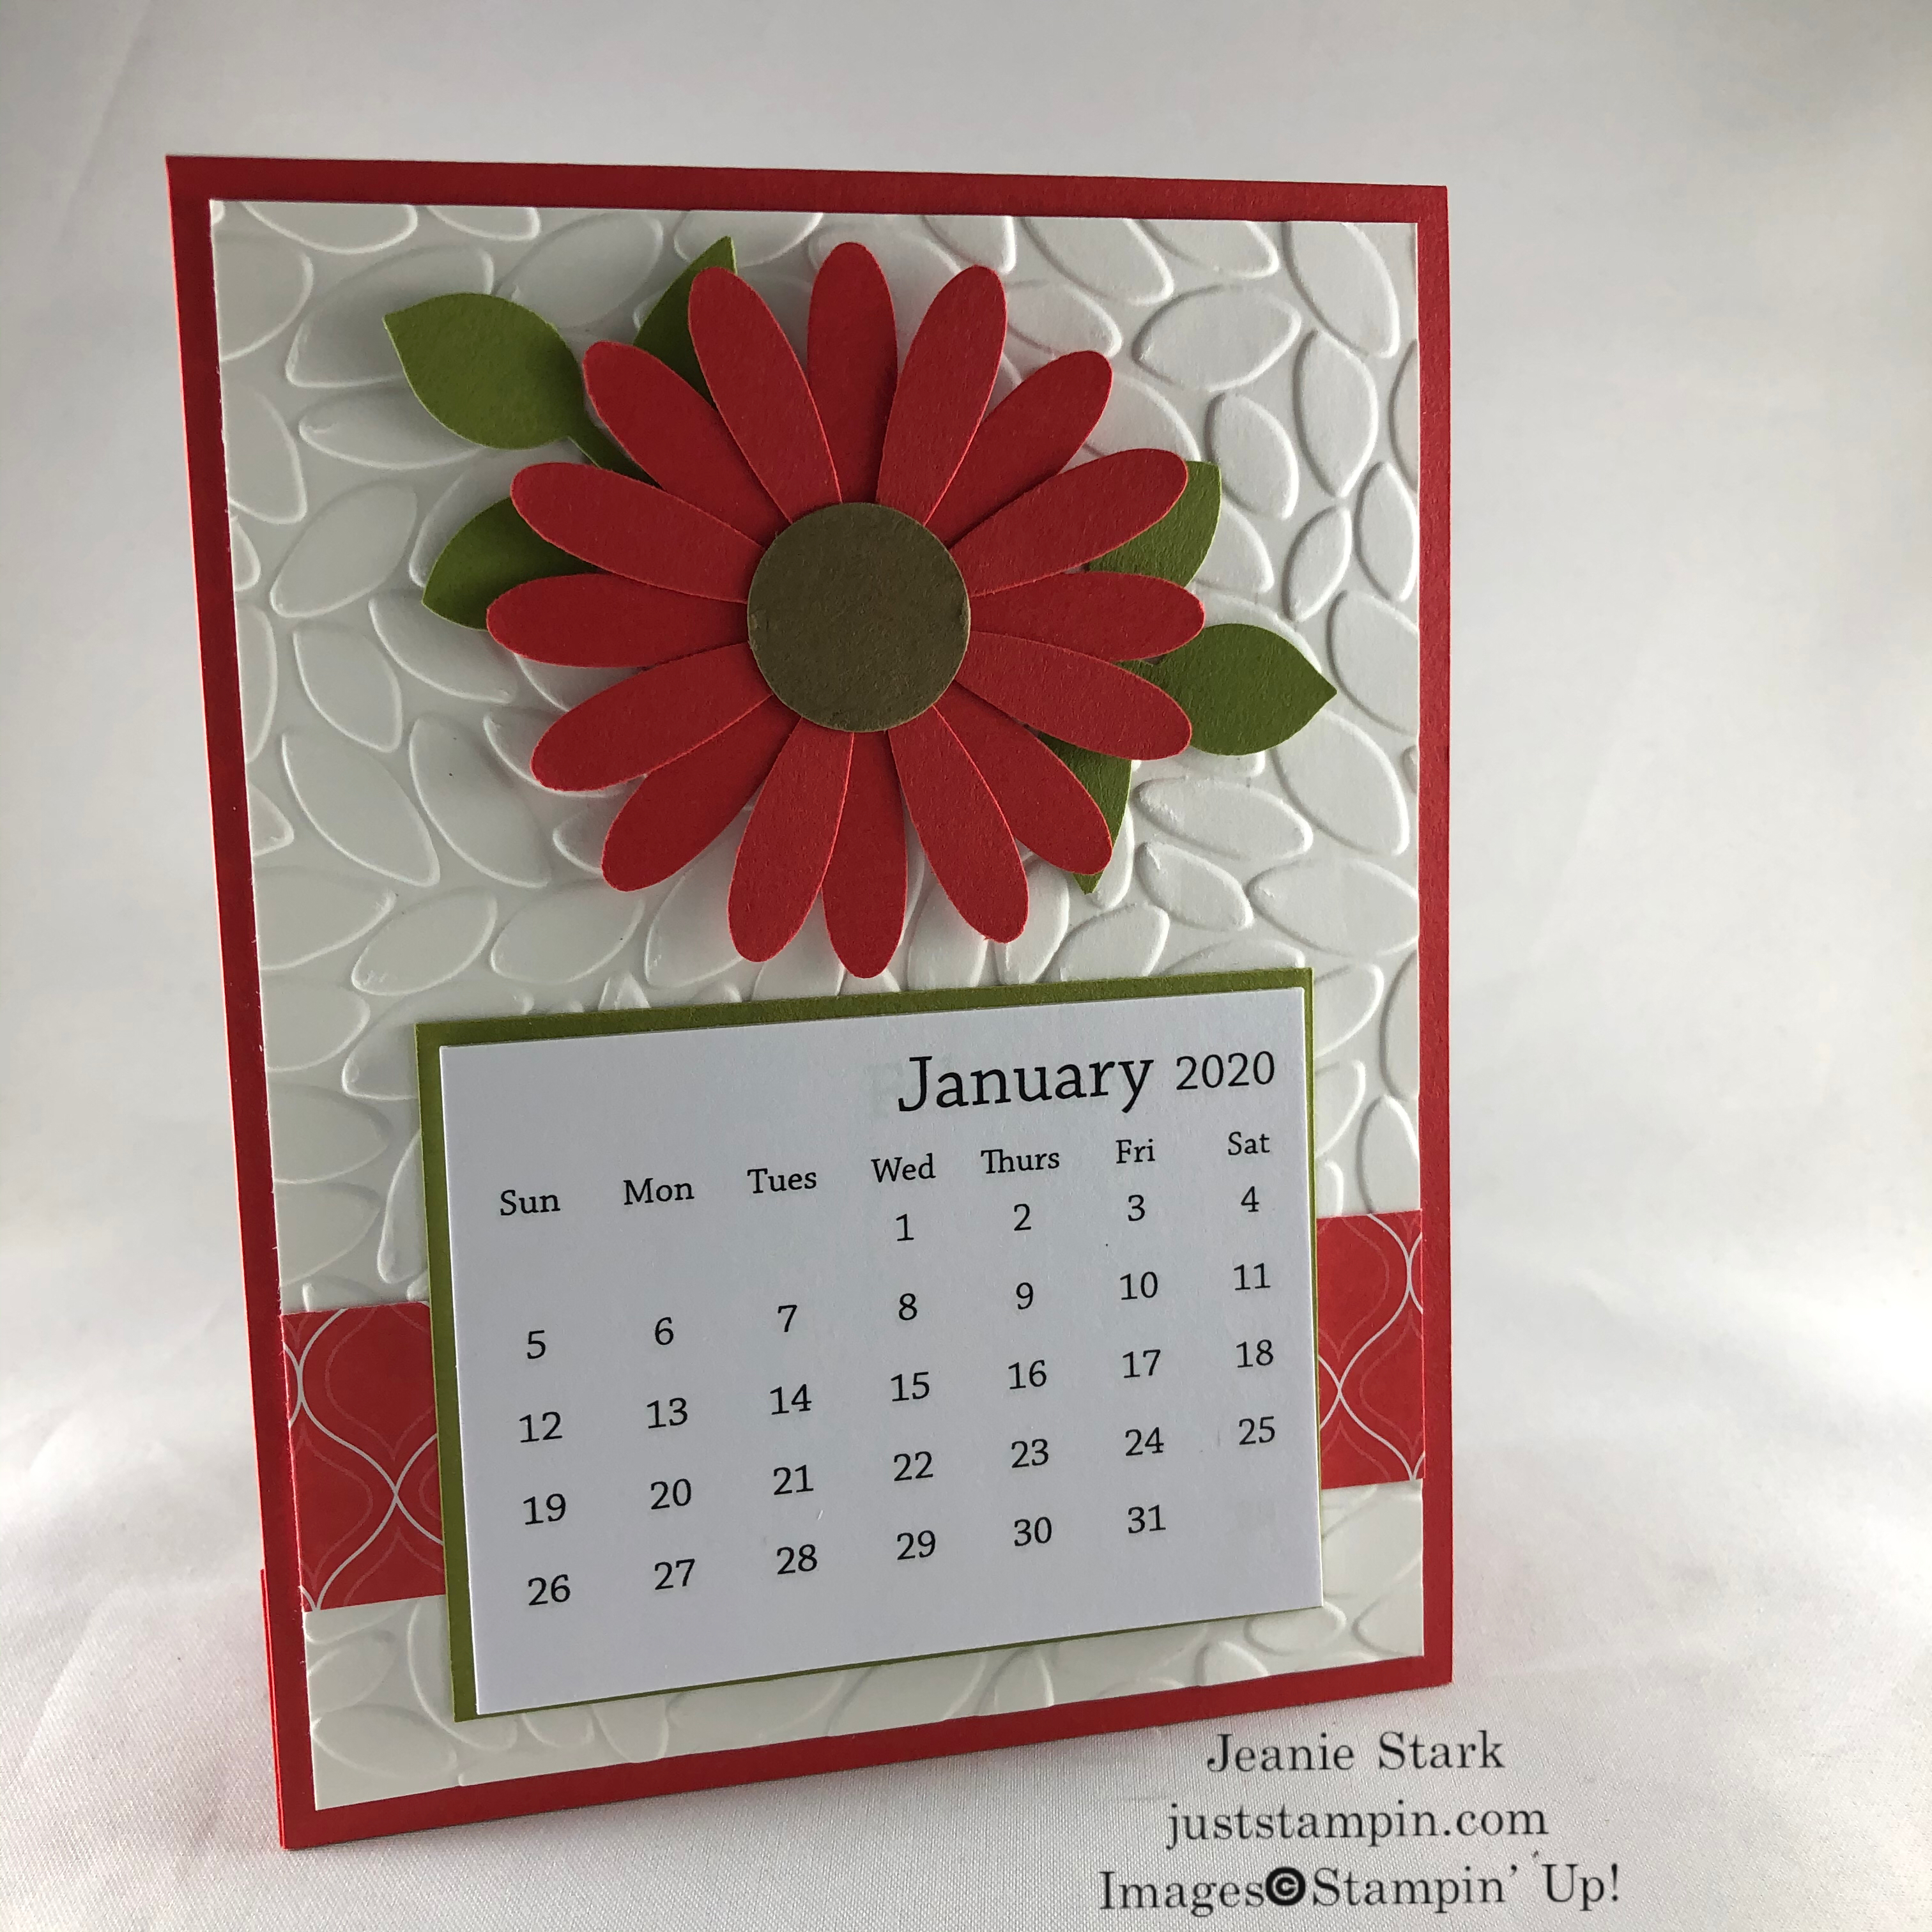 Stampin' Up! Calendar Card idea made with Daisy Punch and Petal Burst Embossing Folder - Jeanie Stark StampinUp